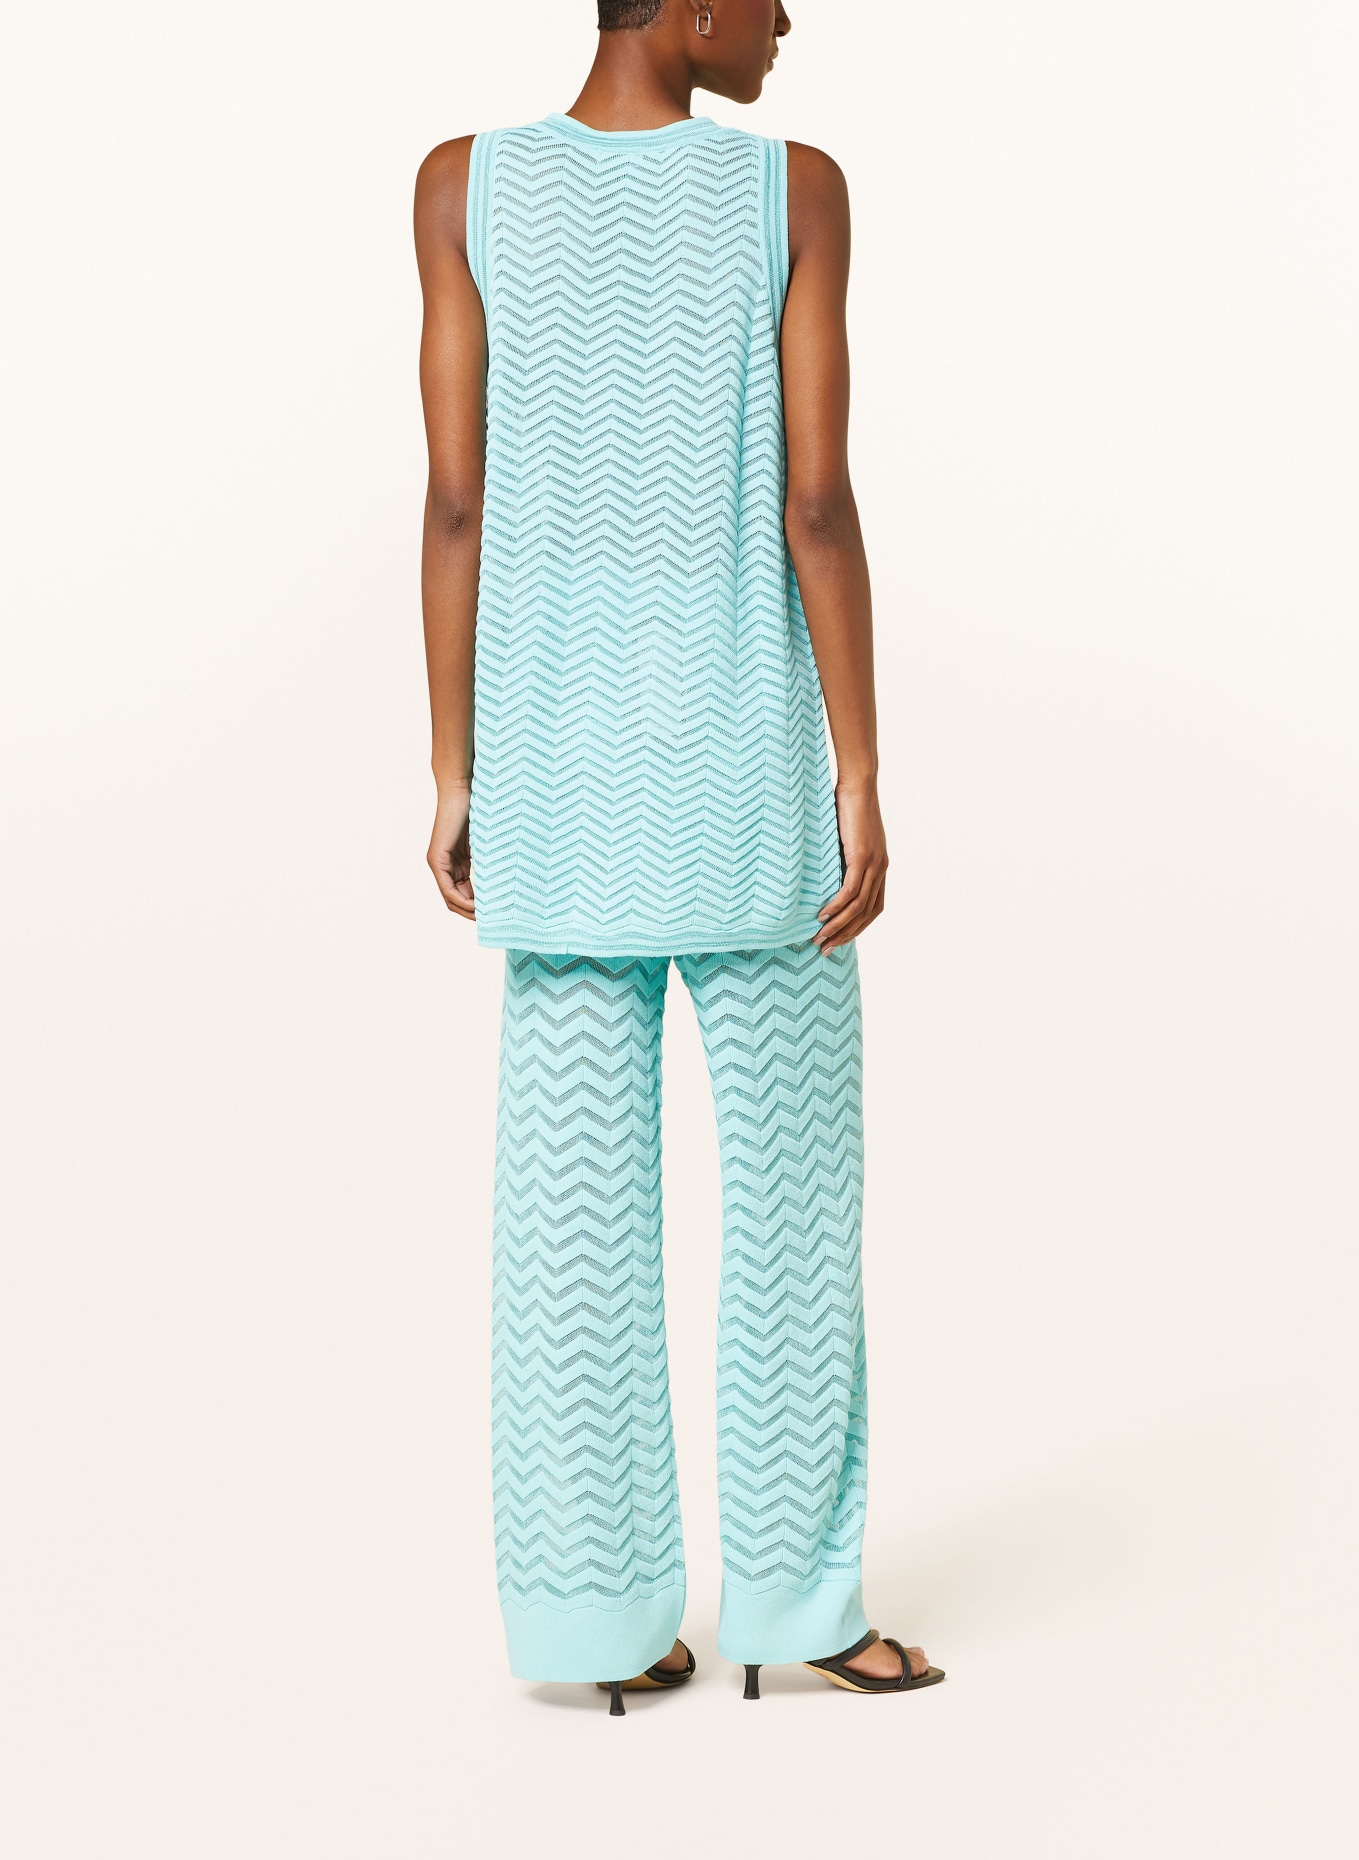 RIANI Knit top, Color: TURQUOISE (Image 3)